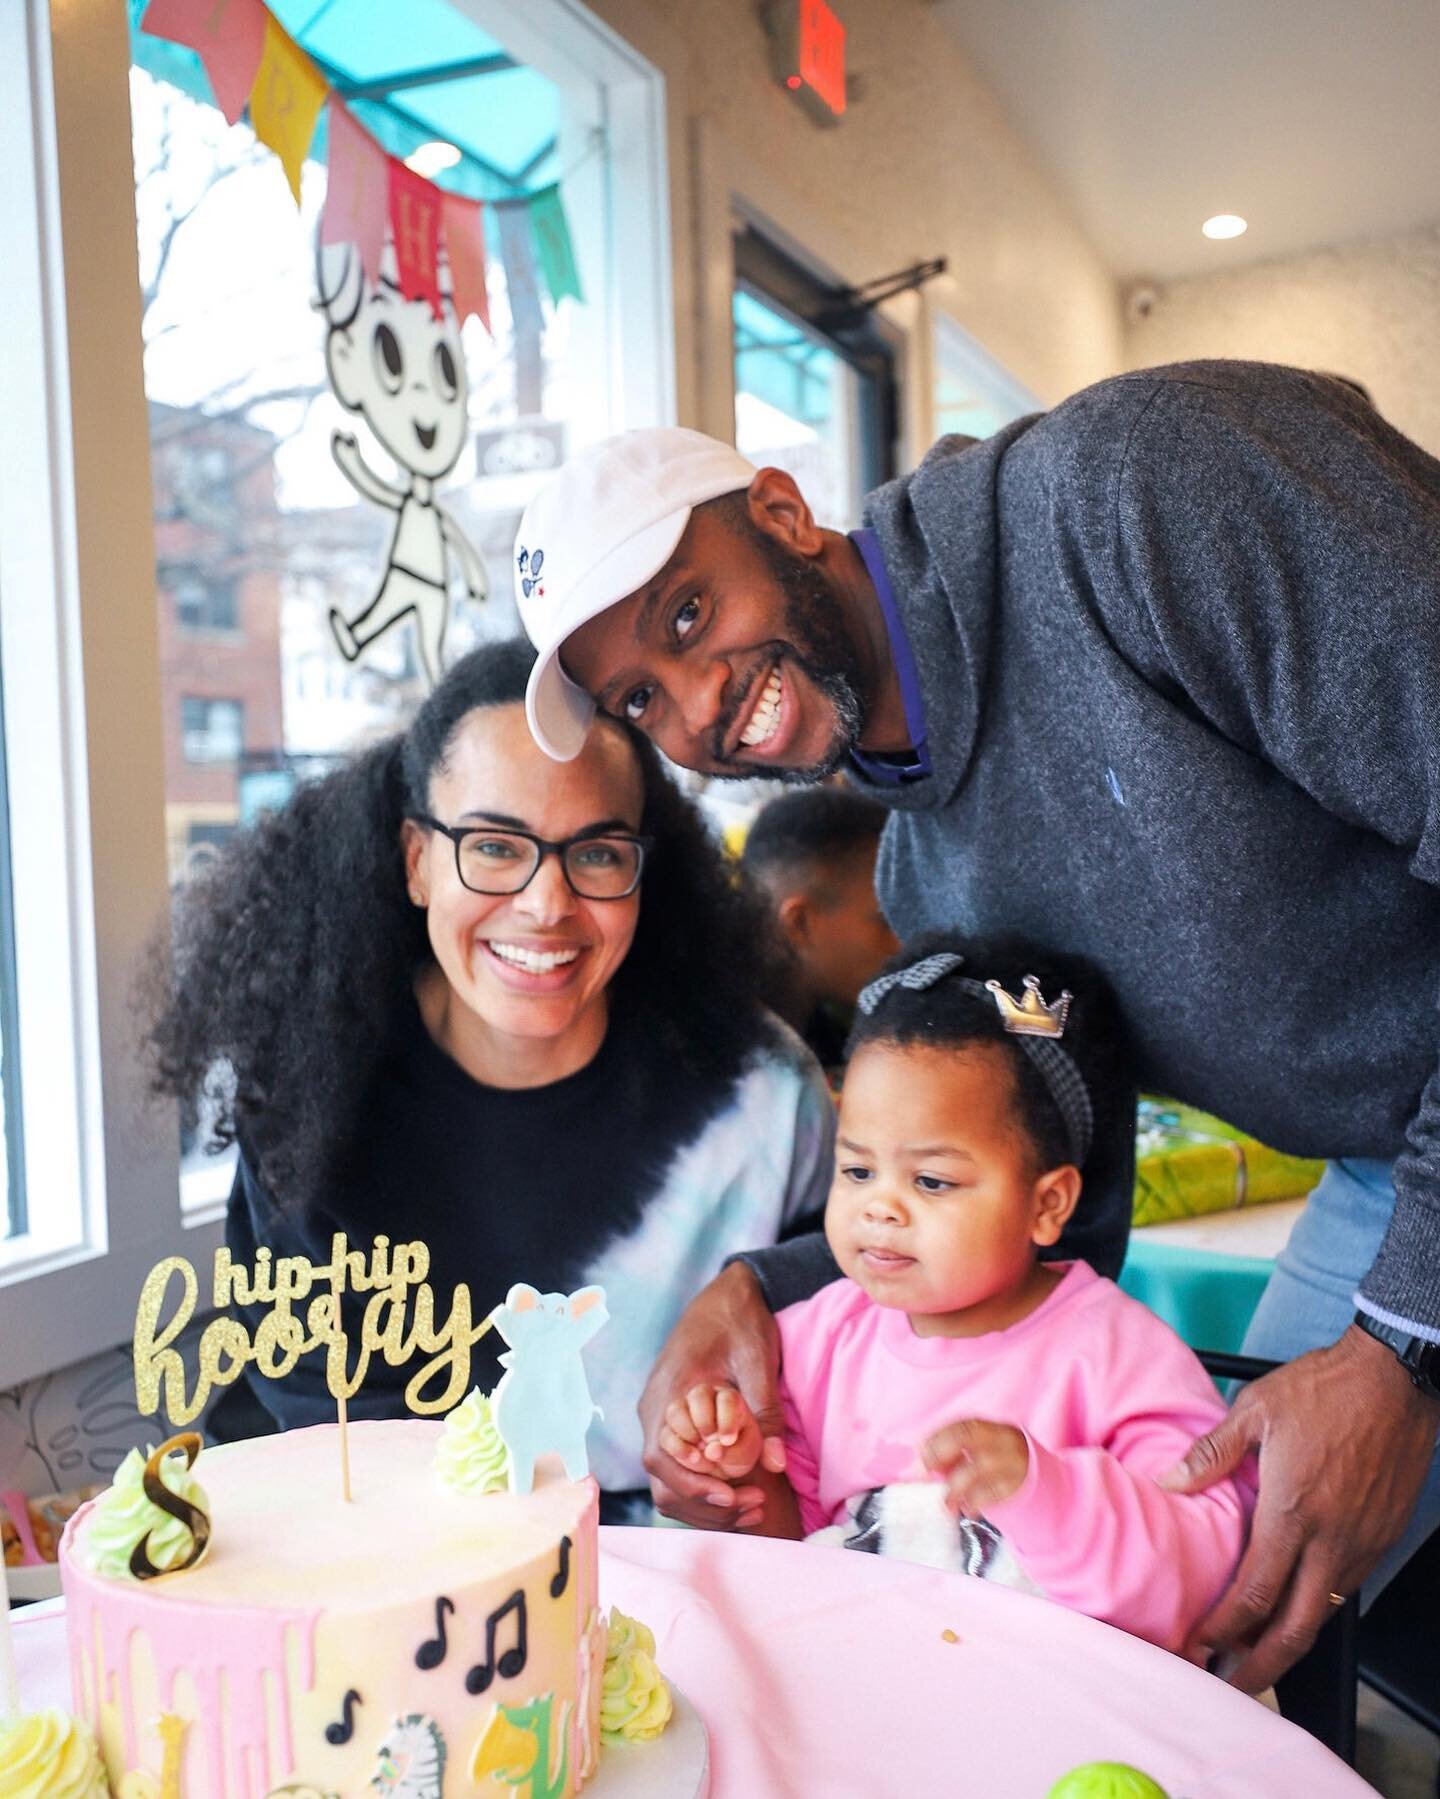 We&rsquo;ve donated a party with all the bells and whistles!!! The @neighborhoodbirthcenter just launched their online spring auction to raise funds for the amazing birth center they are opening in Roxbury. We&rsquo;re huge fans of this project and k